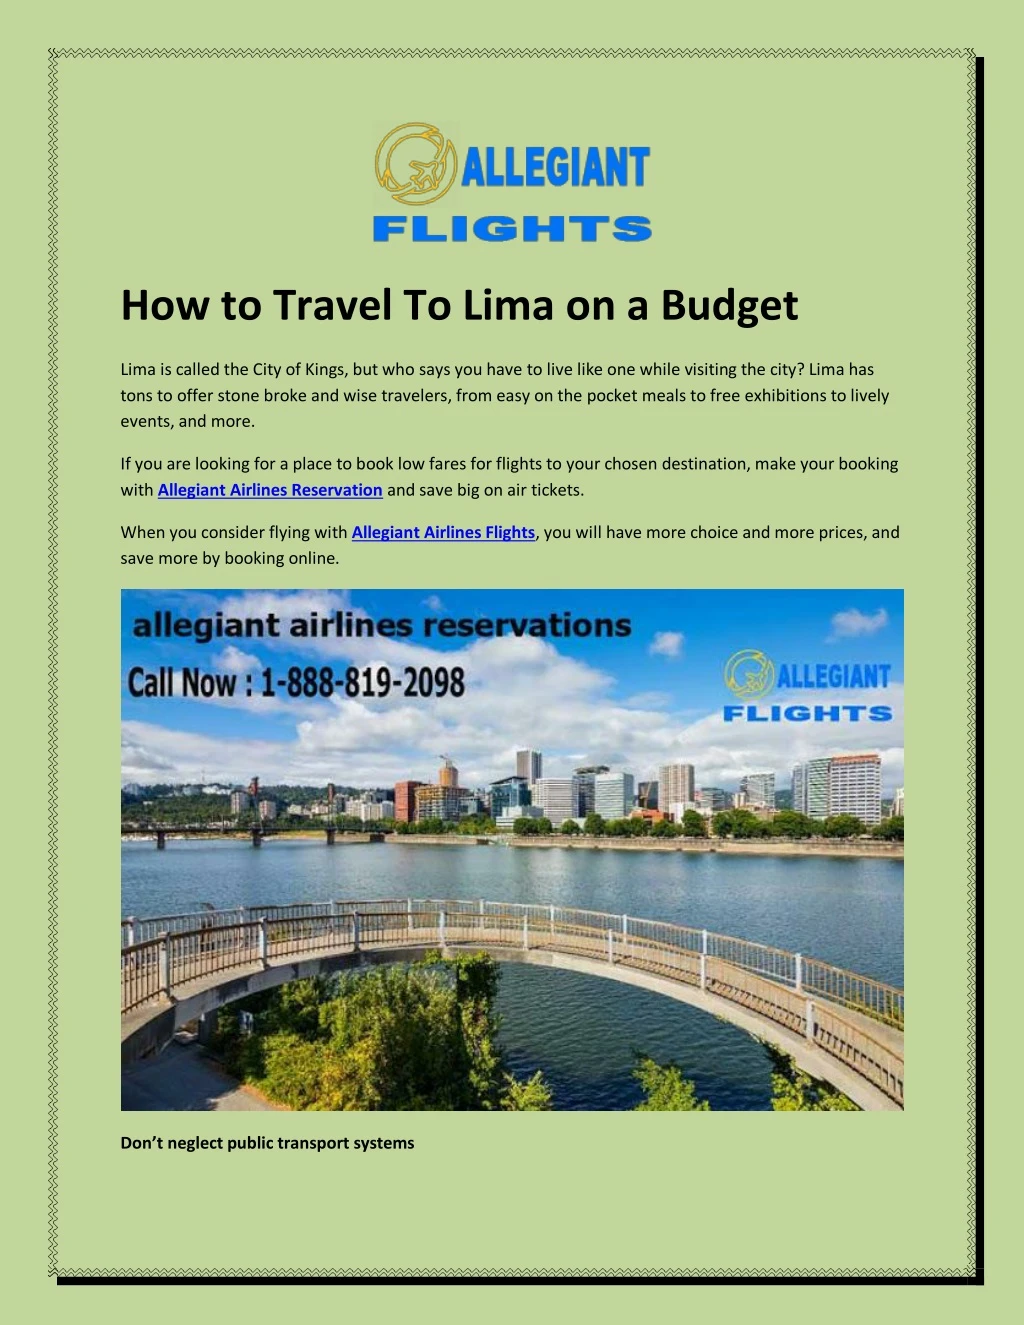 how to travel to lima on a budget